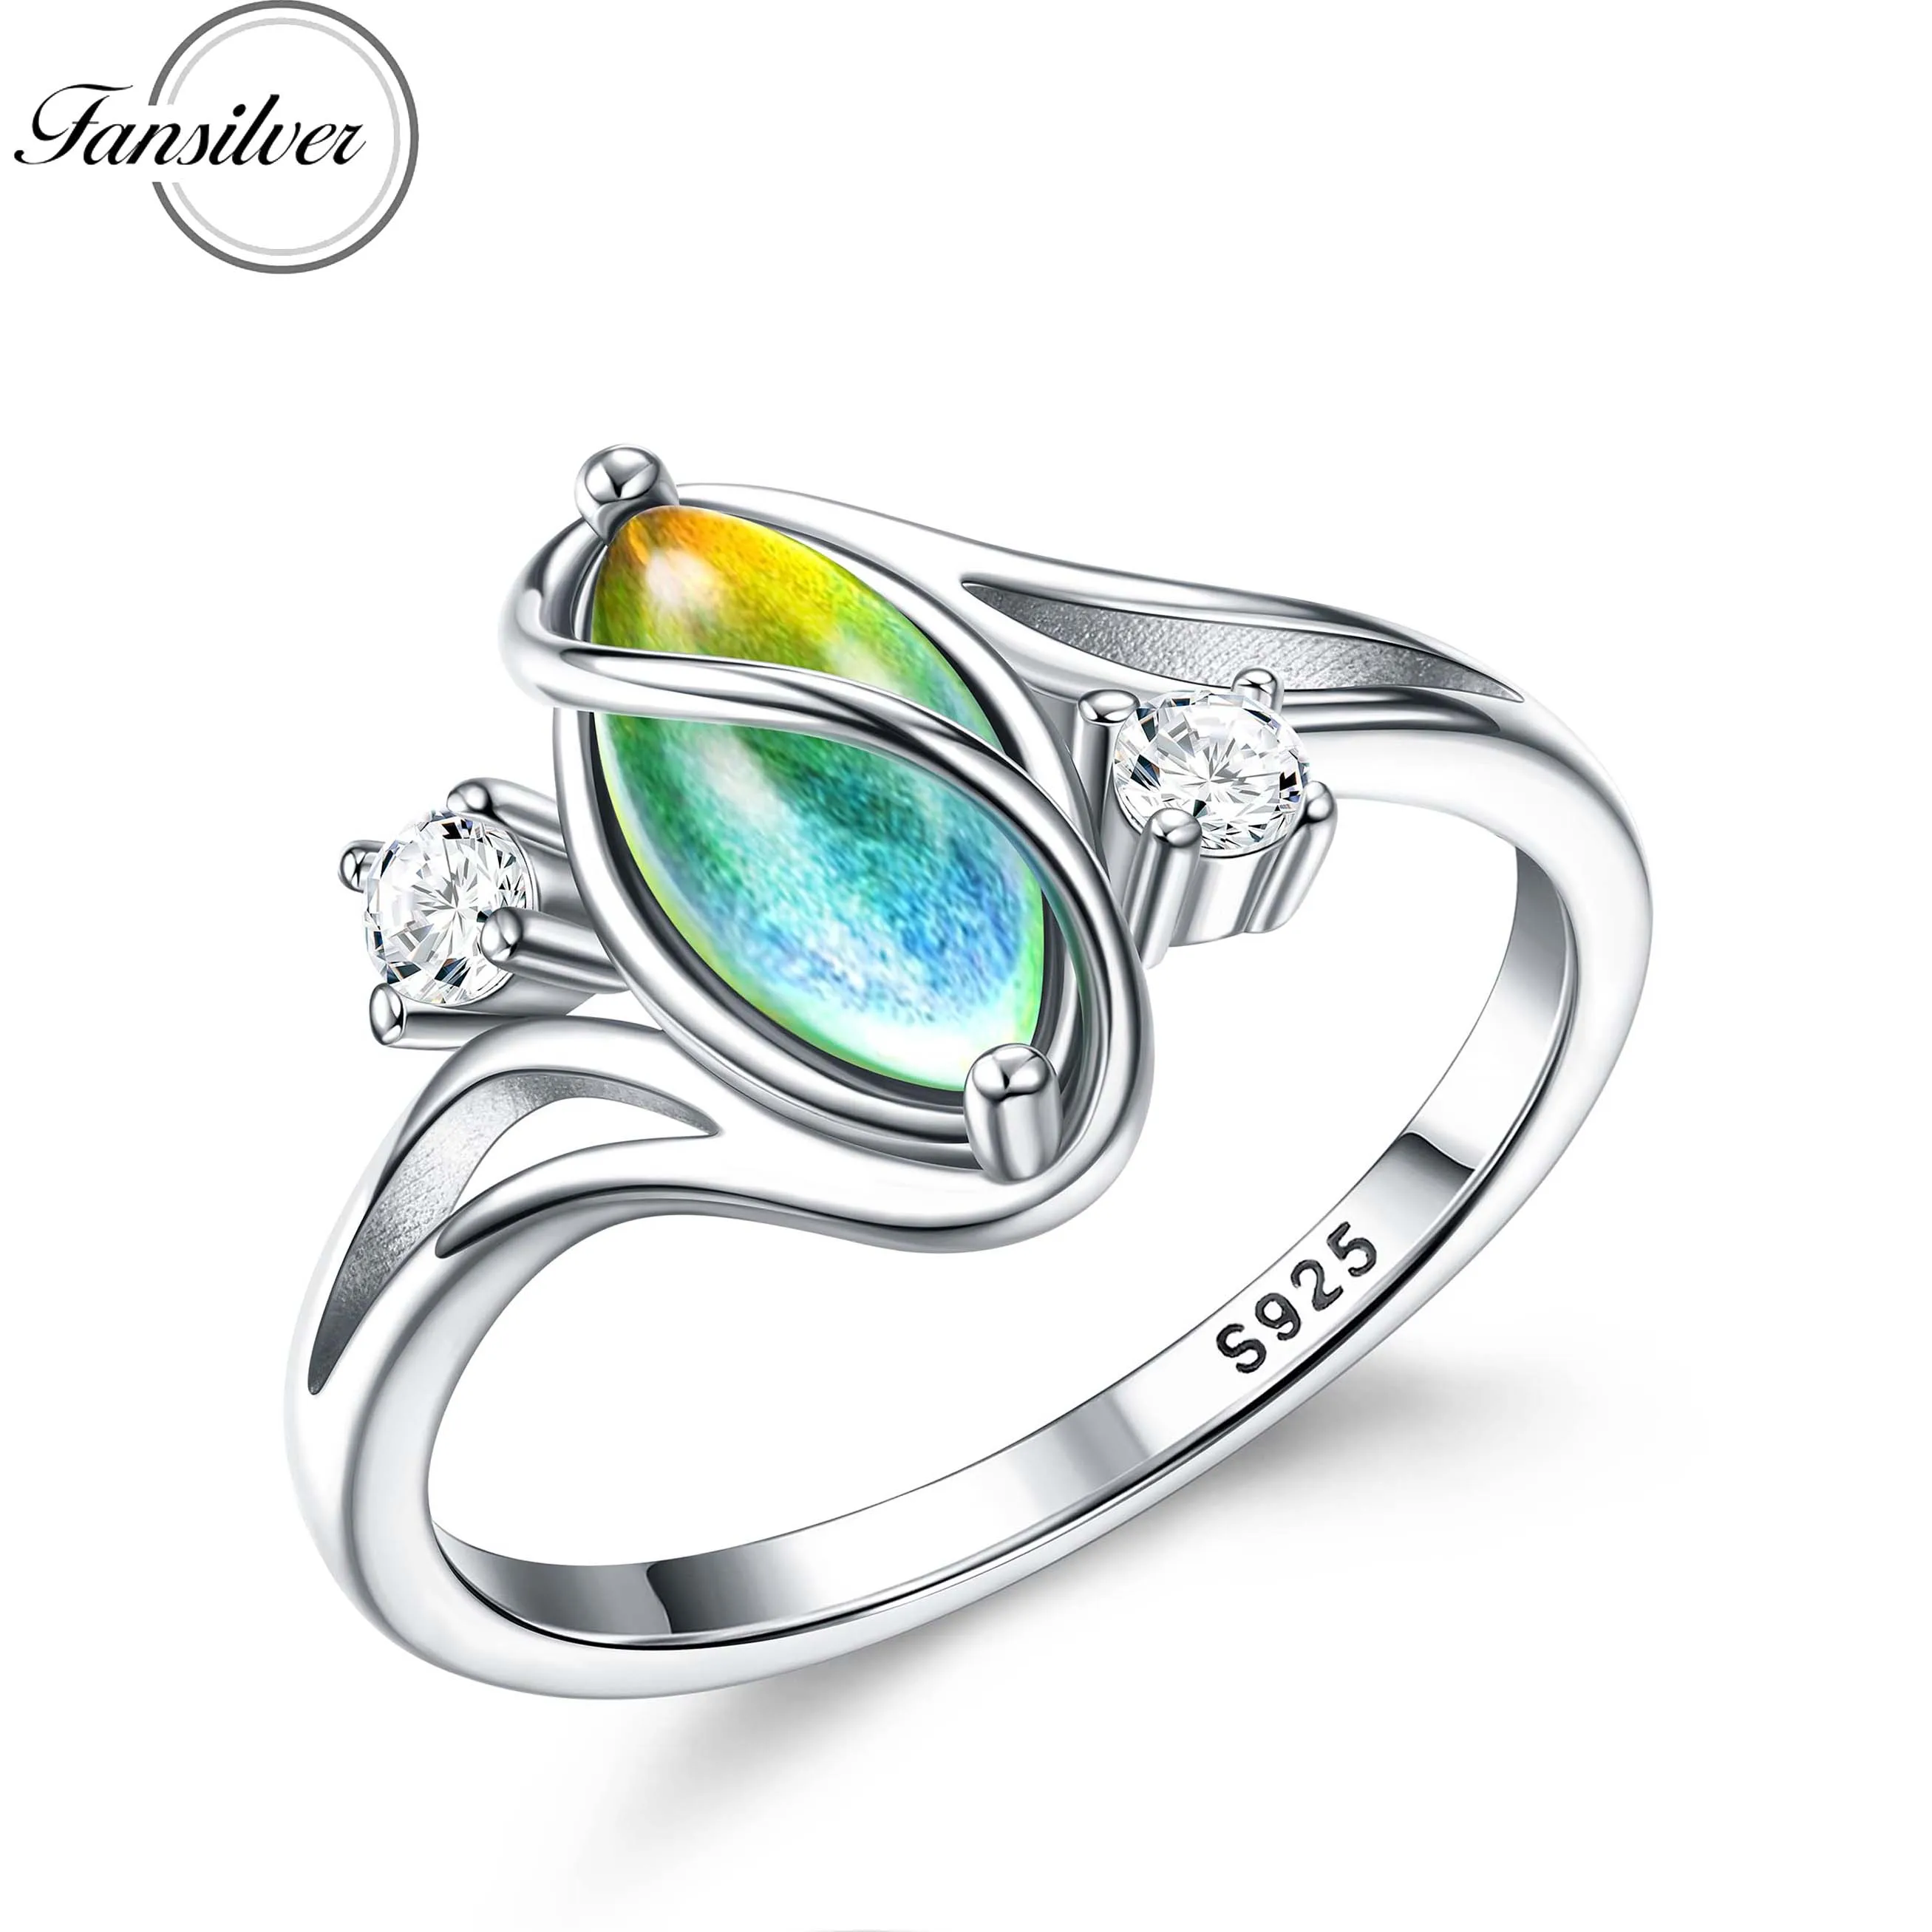 

Fansilver 925 Sterling Silver Mood Rings for Women Cubic Zirconia Accents 18K Gold Plated Oval Solitaire Statement Silver Rings